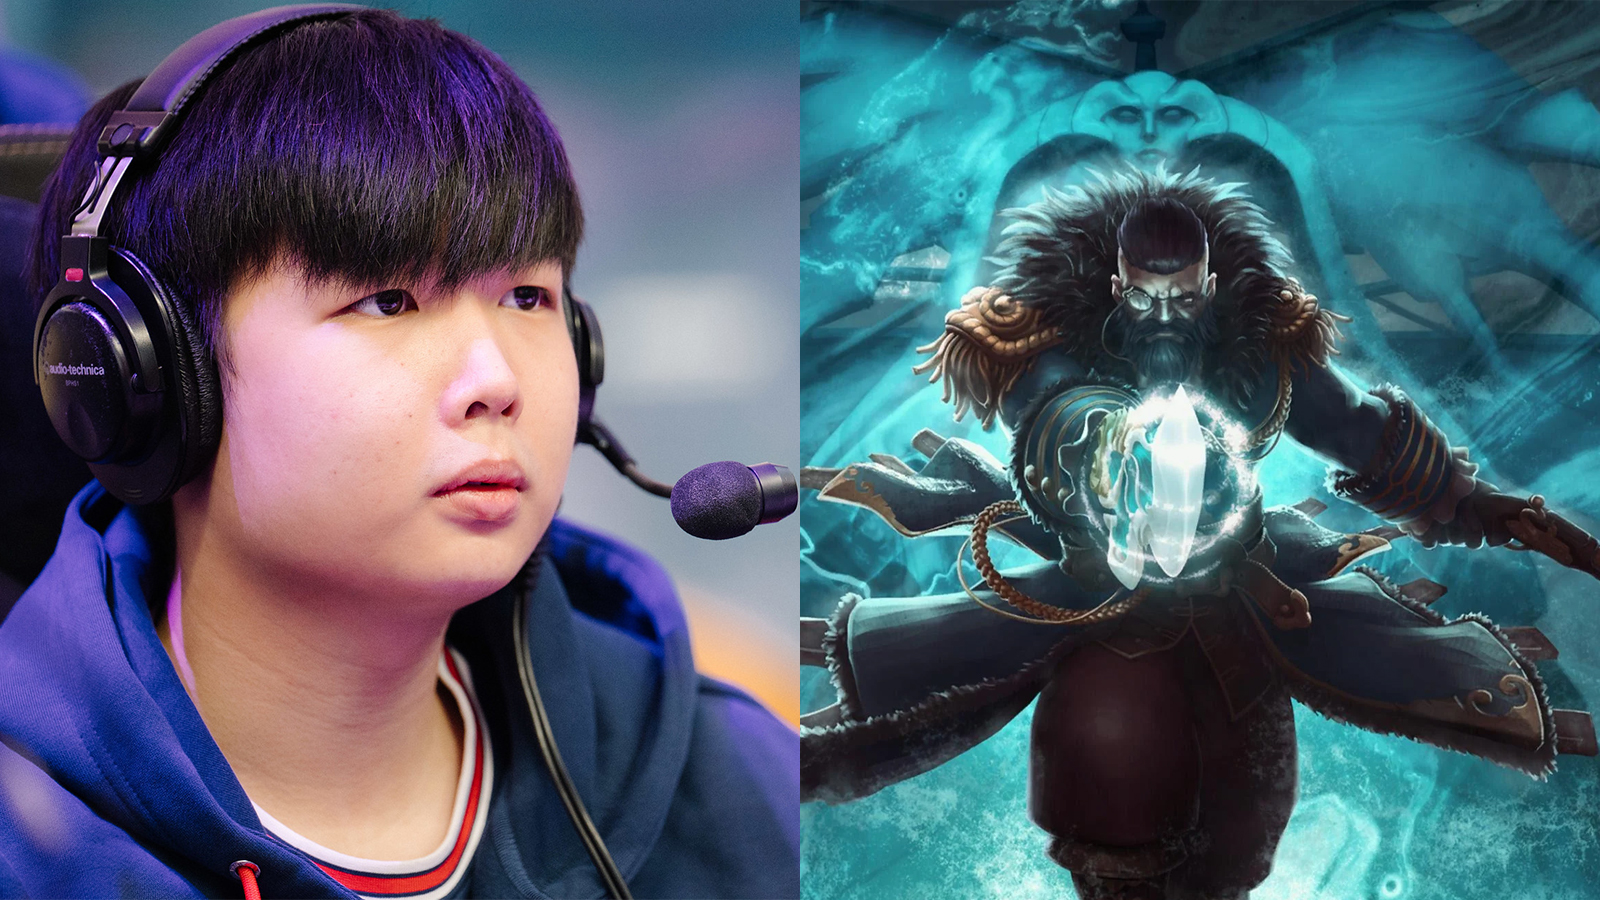 This Malaysian Is Now The Best Dota 2 Player In Europe